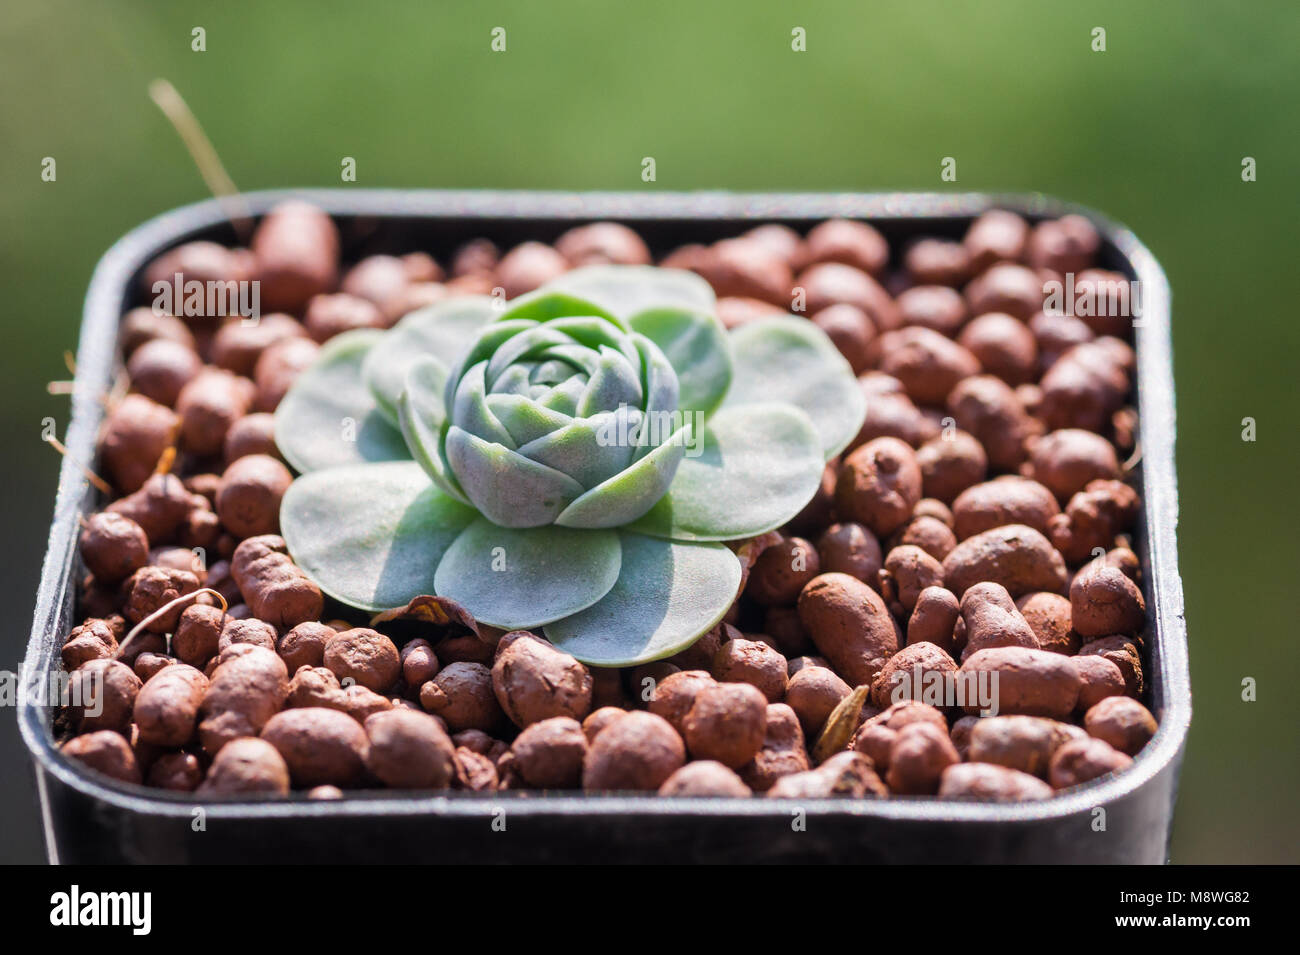 Succulents or cactus in desert botanical garden for decoration and agriculture design. Orostachys boehmeri (Dunce's Cap, Chinese Dunce Cap) Stock Photo